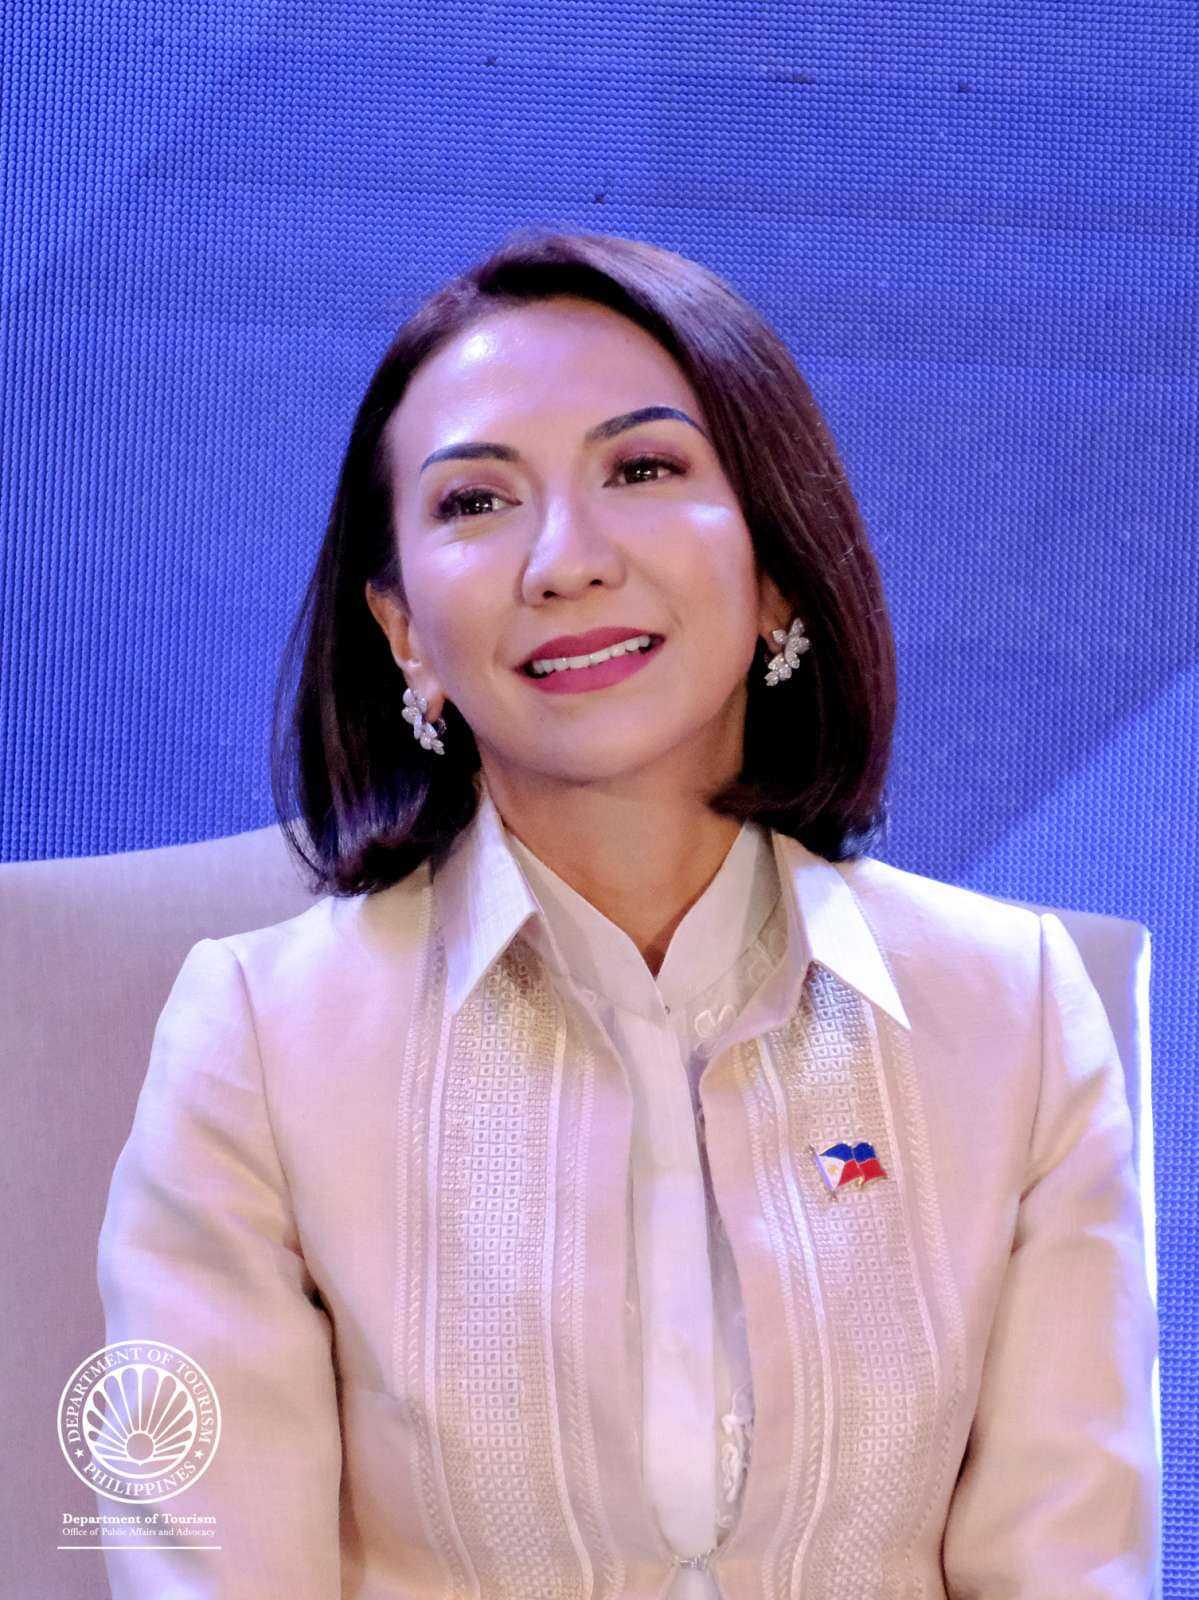 DOT affirms support for peace and security efforts under Marcos administration – Sec. Frasco